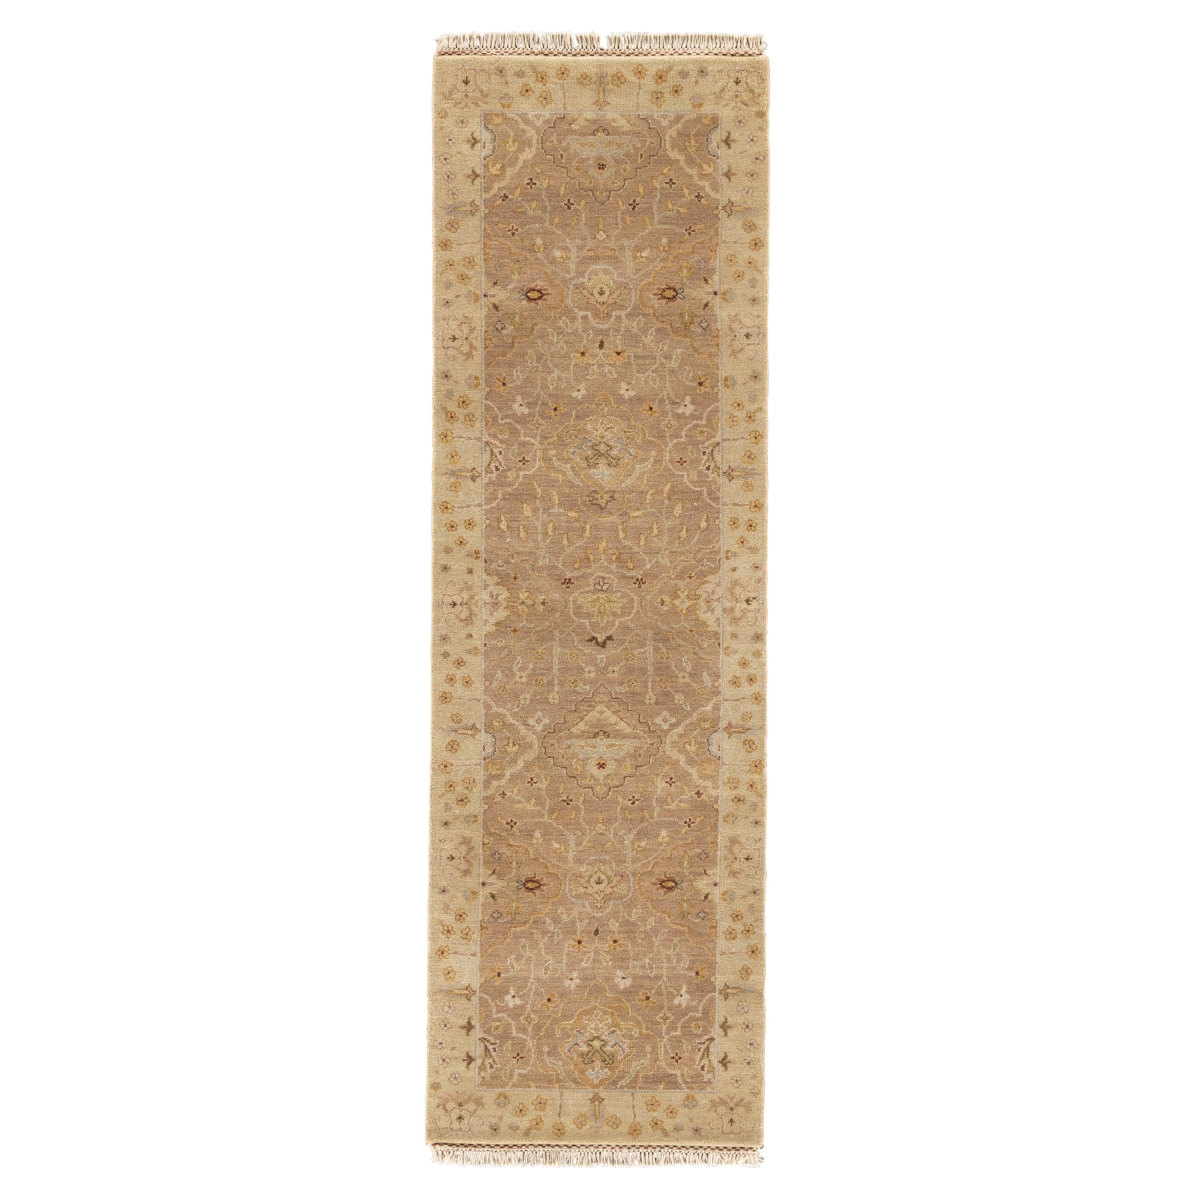 Rug103307 2 Ft. 6 In. X 8 Ft. Opus Allegro Hand-knotted Floral Cream & Maroon Runner Rug